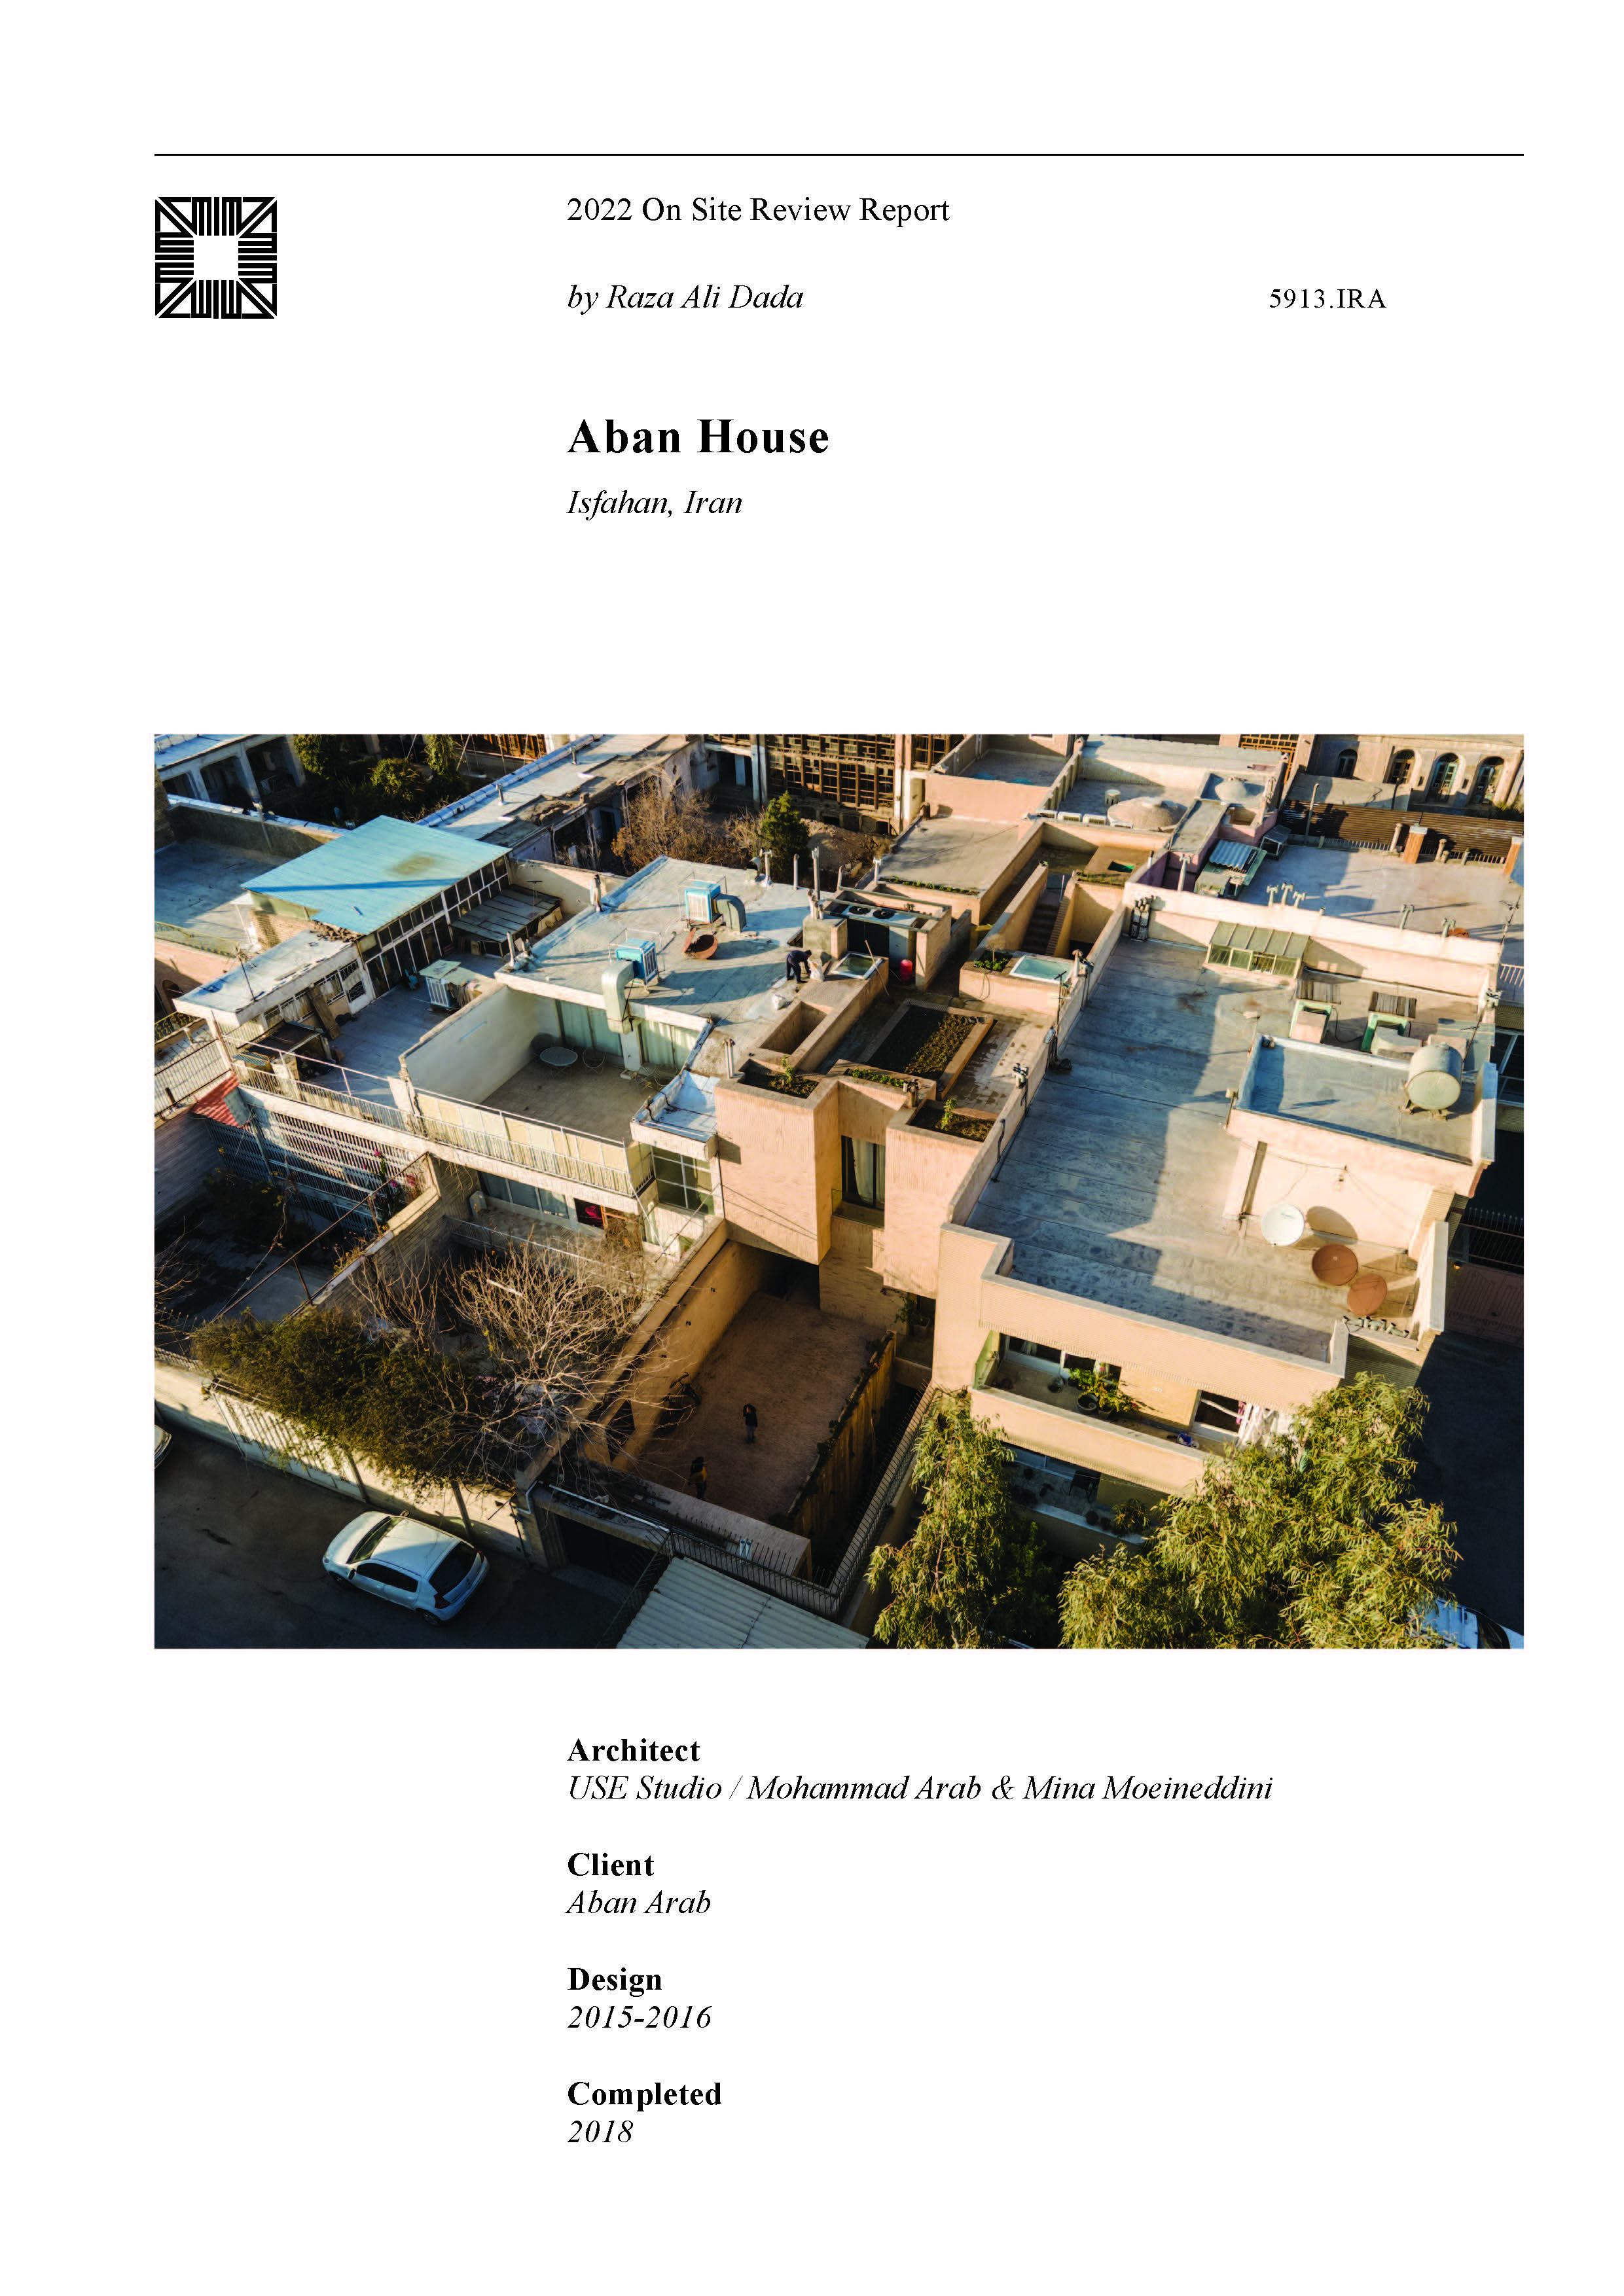 Aban House On-site Review Report